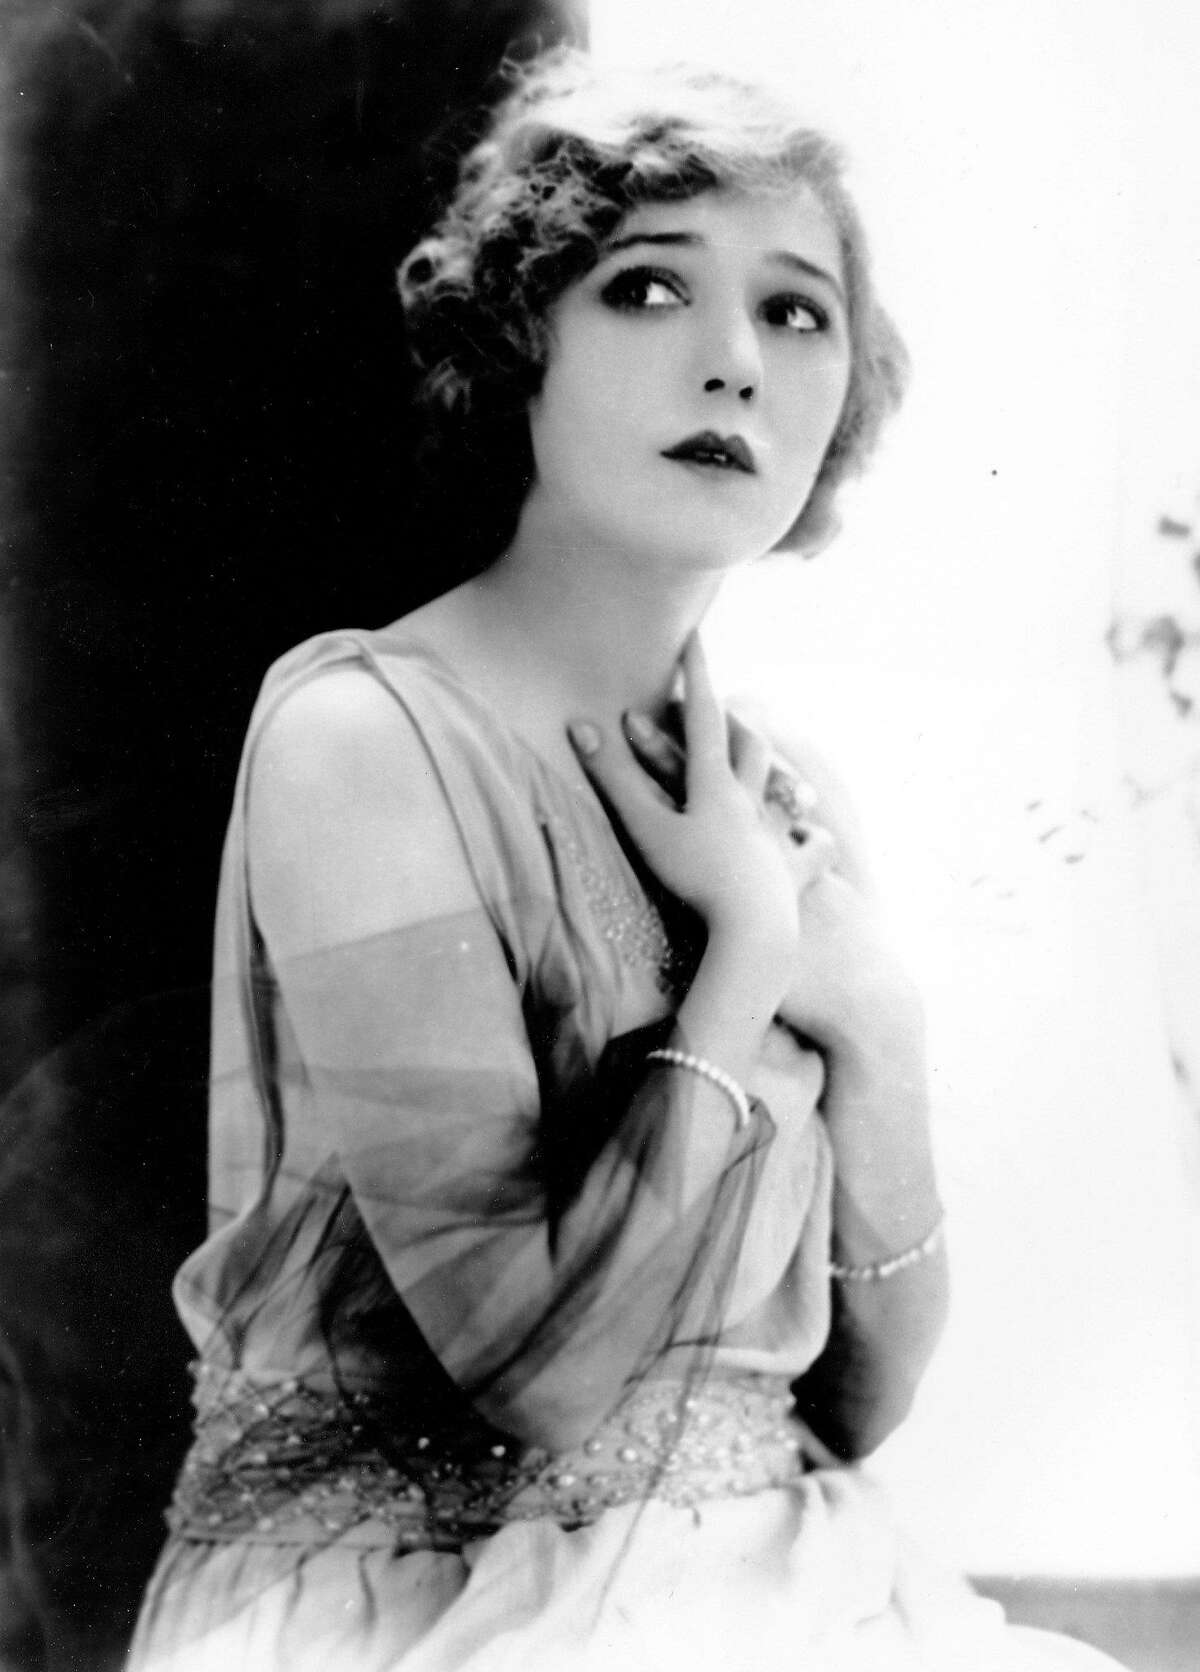 ** FILE ** Canadian-born American actress Mary Pickford is photographed on Aug. 29, 1922. Mary Pickford, nicknamed America's Sweetheart or simply ``Little Mary.'' She was perhaps the best known woman in the world. (AP Photo) Ran on: 07-11-2004 Canadian-born actress Mary Pickford, known as Americas Sweetheart, embodies the era in this 1922 photo.